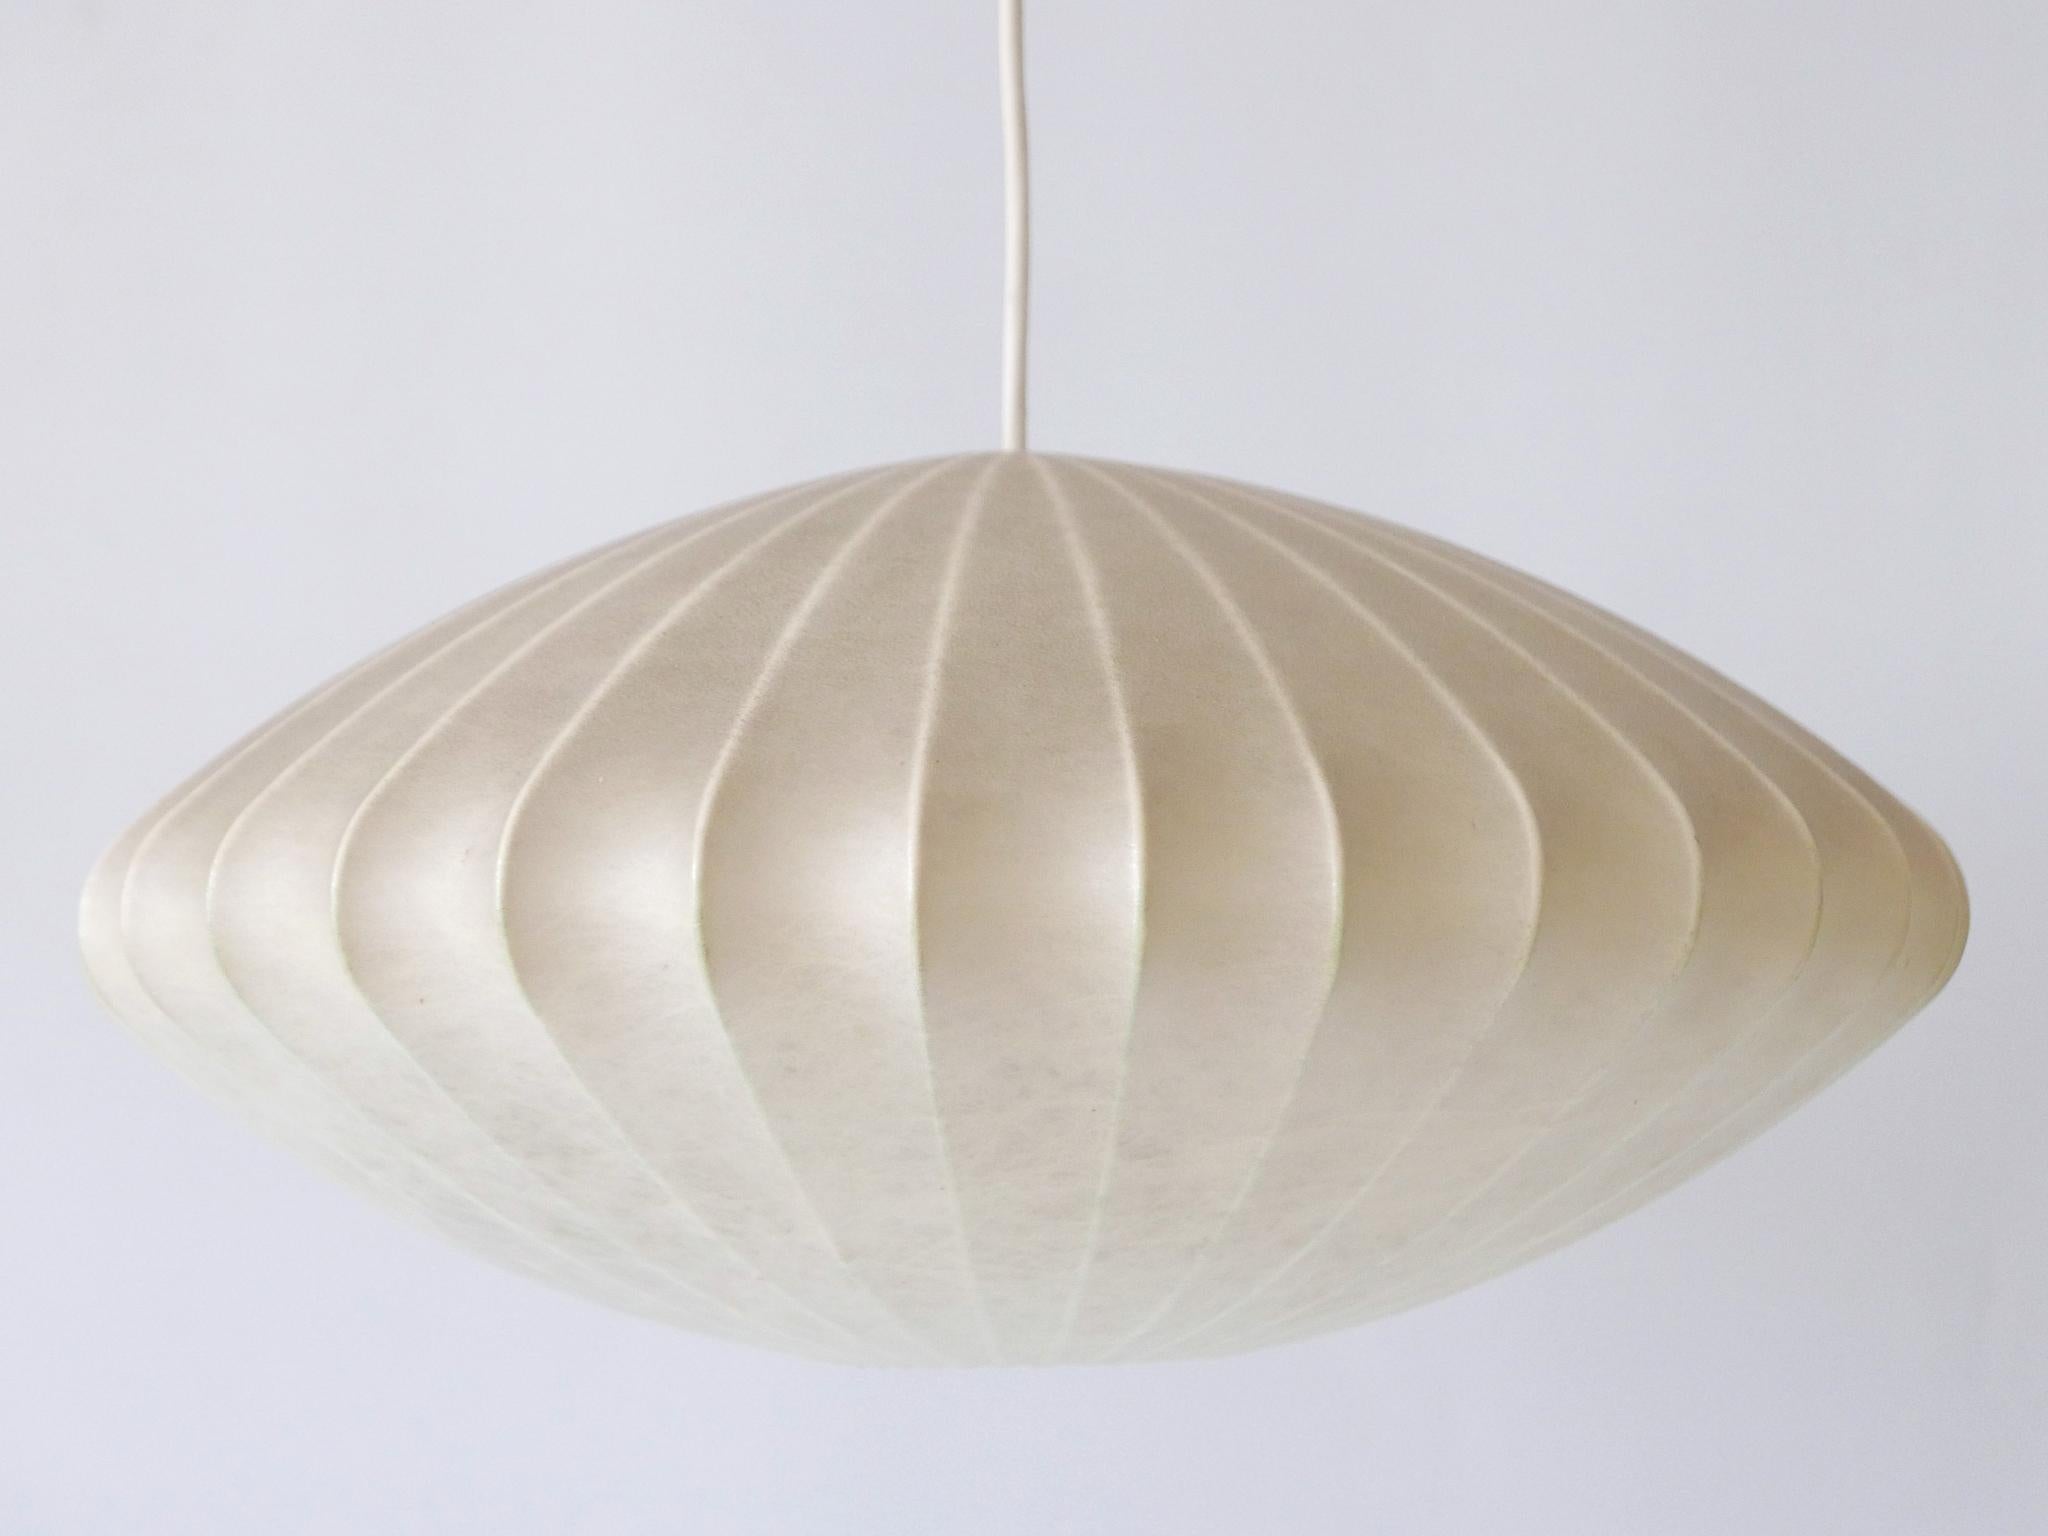 Rare Mid-Century Modern Cocoon Pendant Lamp or Hanging Light by Goldkant 1960s For Sale 1